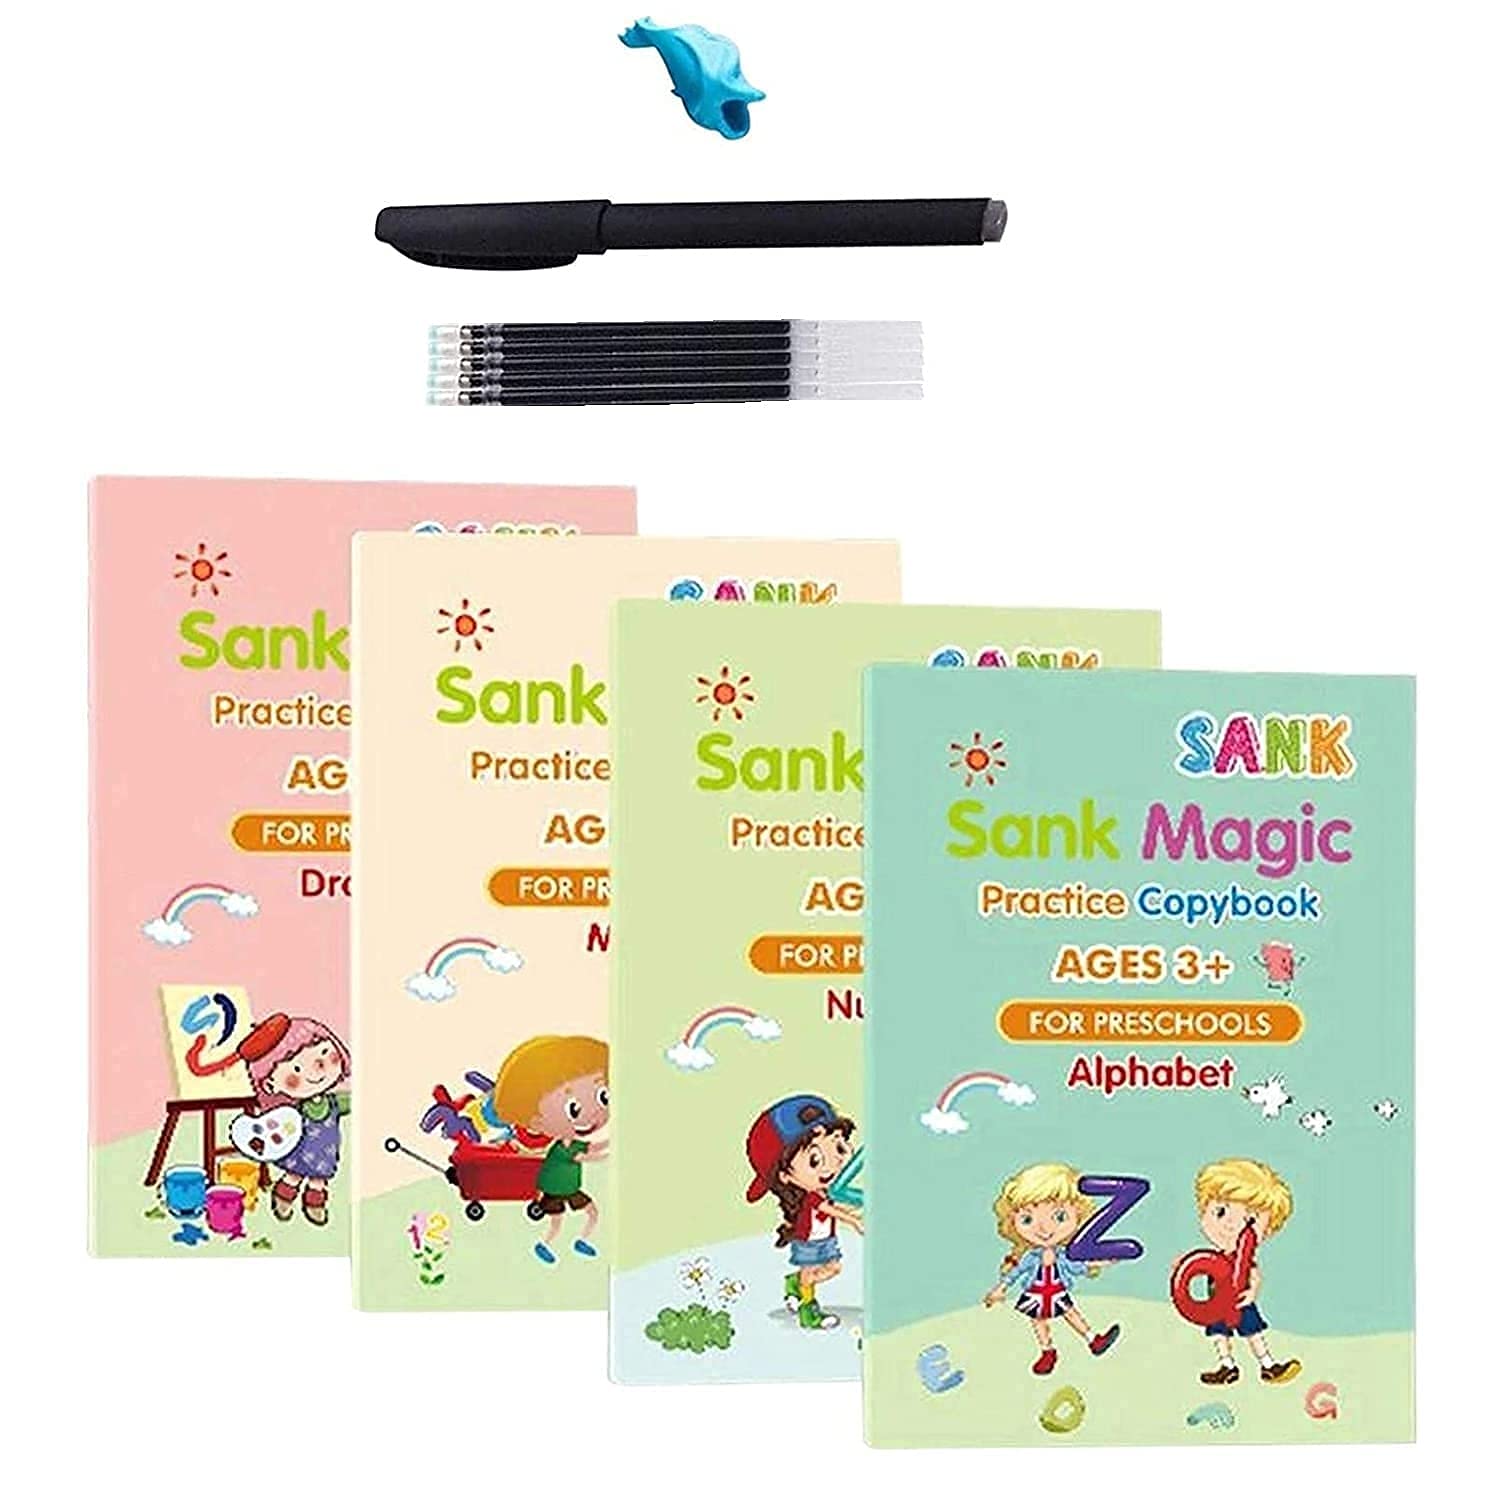 Magic Book for Kids (4 Books 1 Pen 1 Hand Grip 10 Refill)(SANK ORIGINAL)  //.//(2) MAGIC WATER BOOK(1 UNIT BOOK + 1 WATER PEN)(RANDOM)..//(3)360  DEGREE CLEANING SILICONE MADE SOFT BABY TEETH BRUSH(AGE-2-5 YEAR)